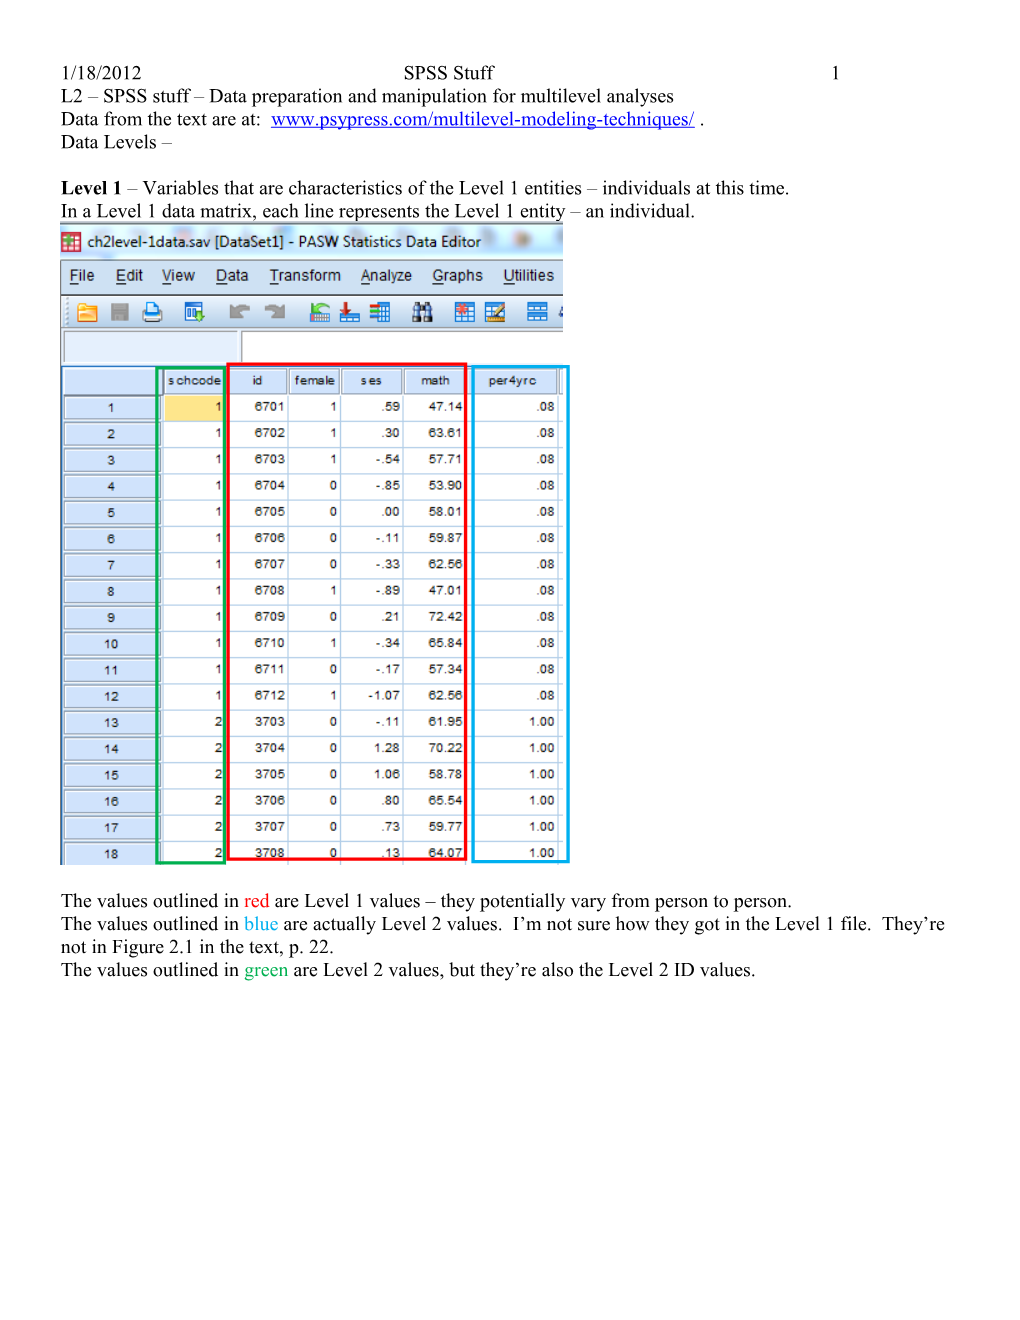 L2 SPSS Stuff Data Preparation and Manipulation for Multilevel Analyses